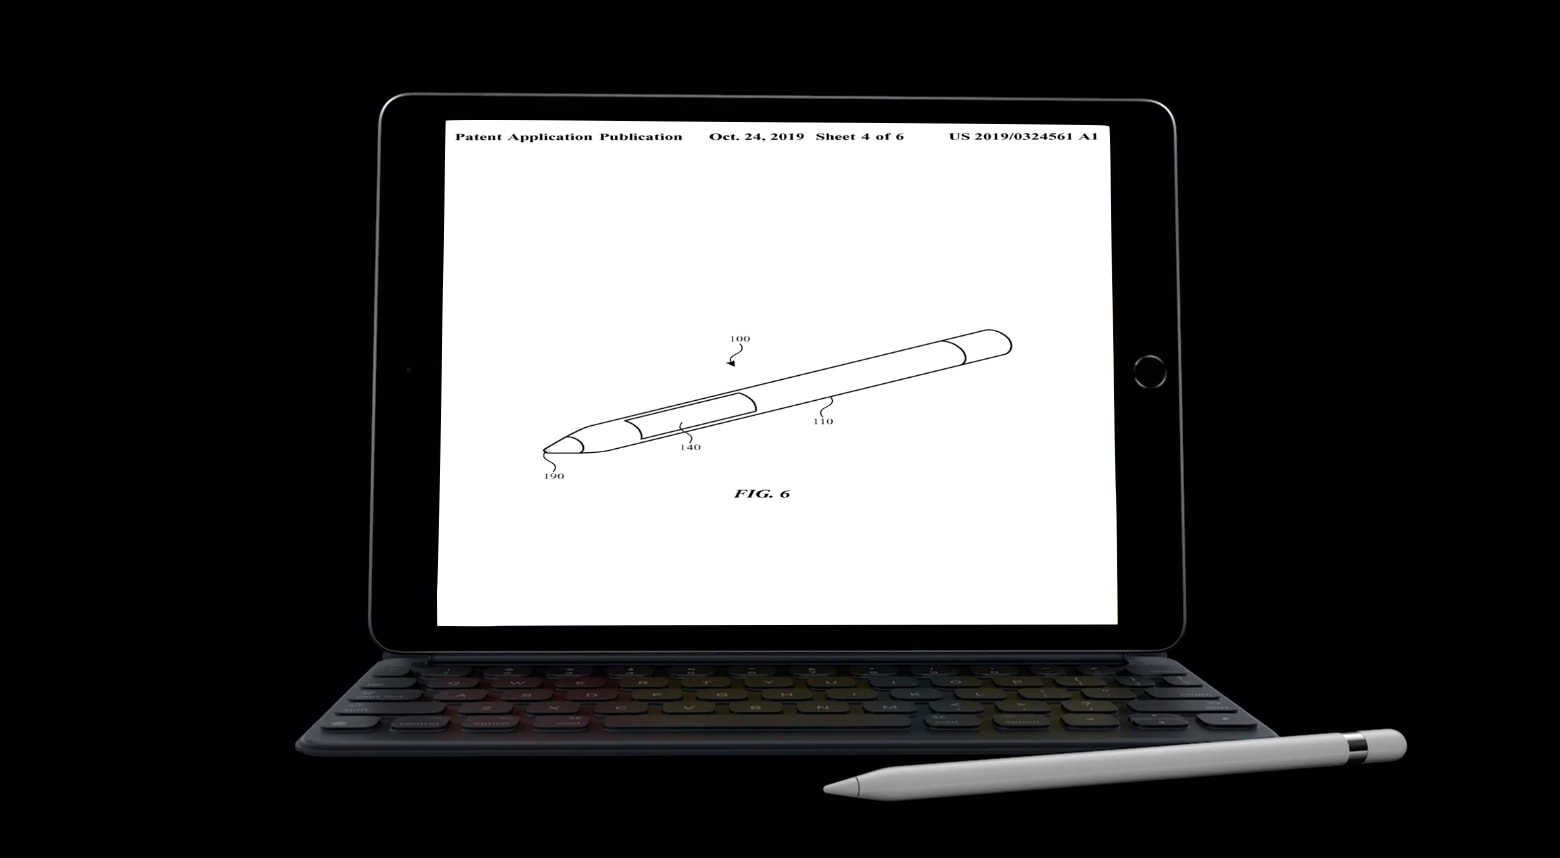 Apple Pencil with touchscreen patent filing